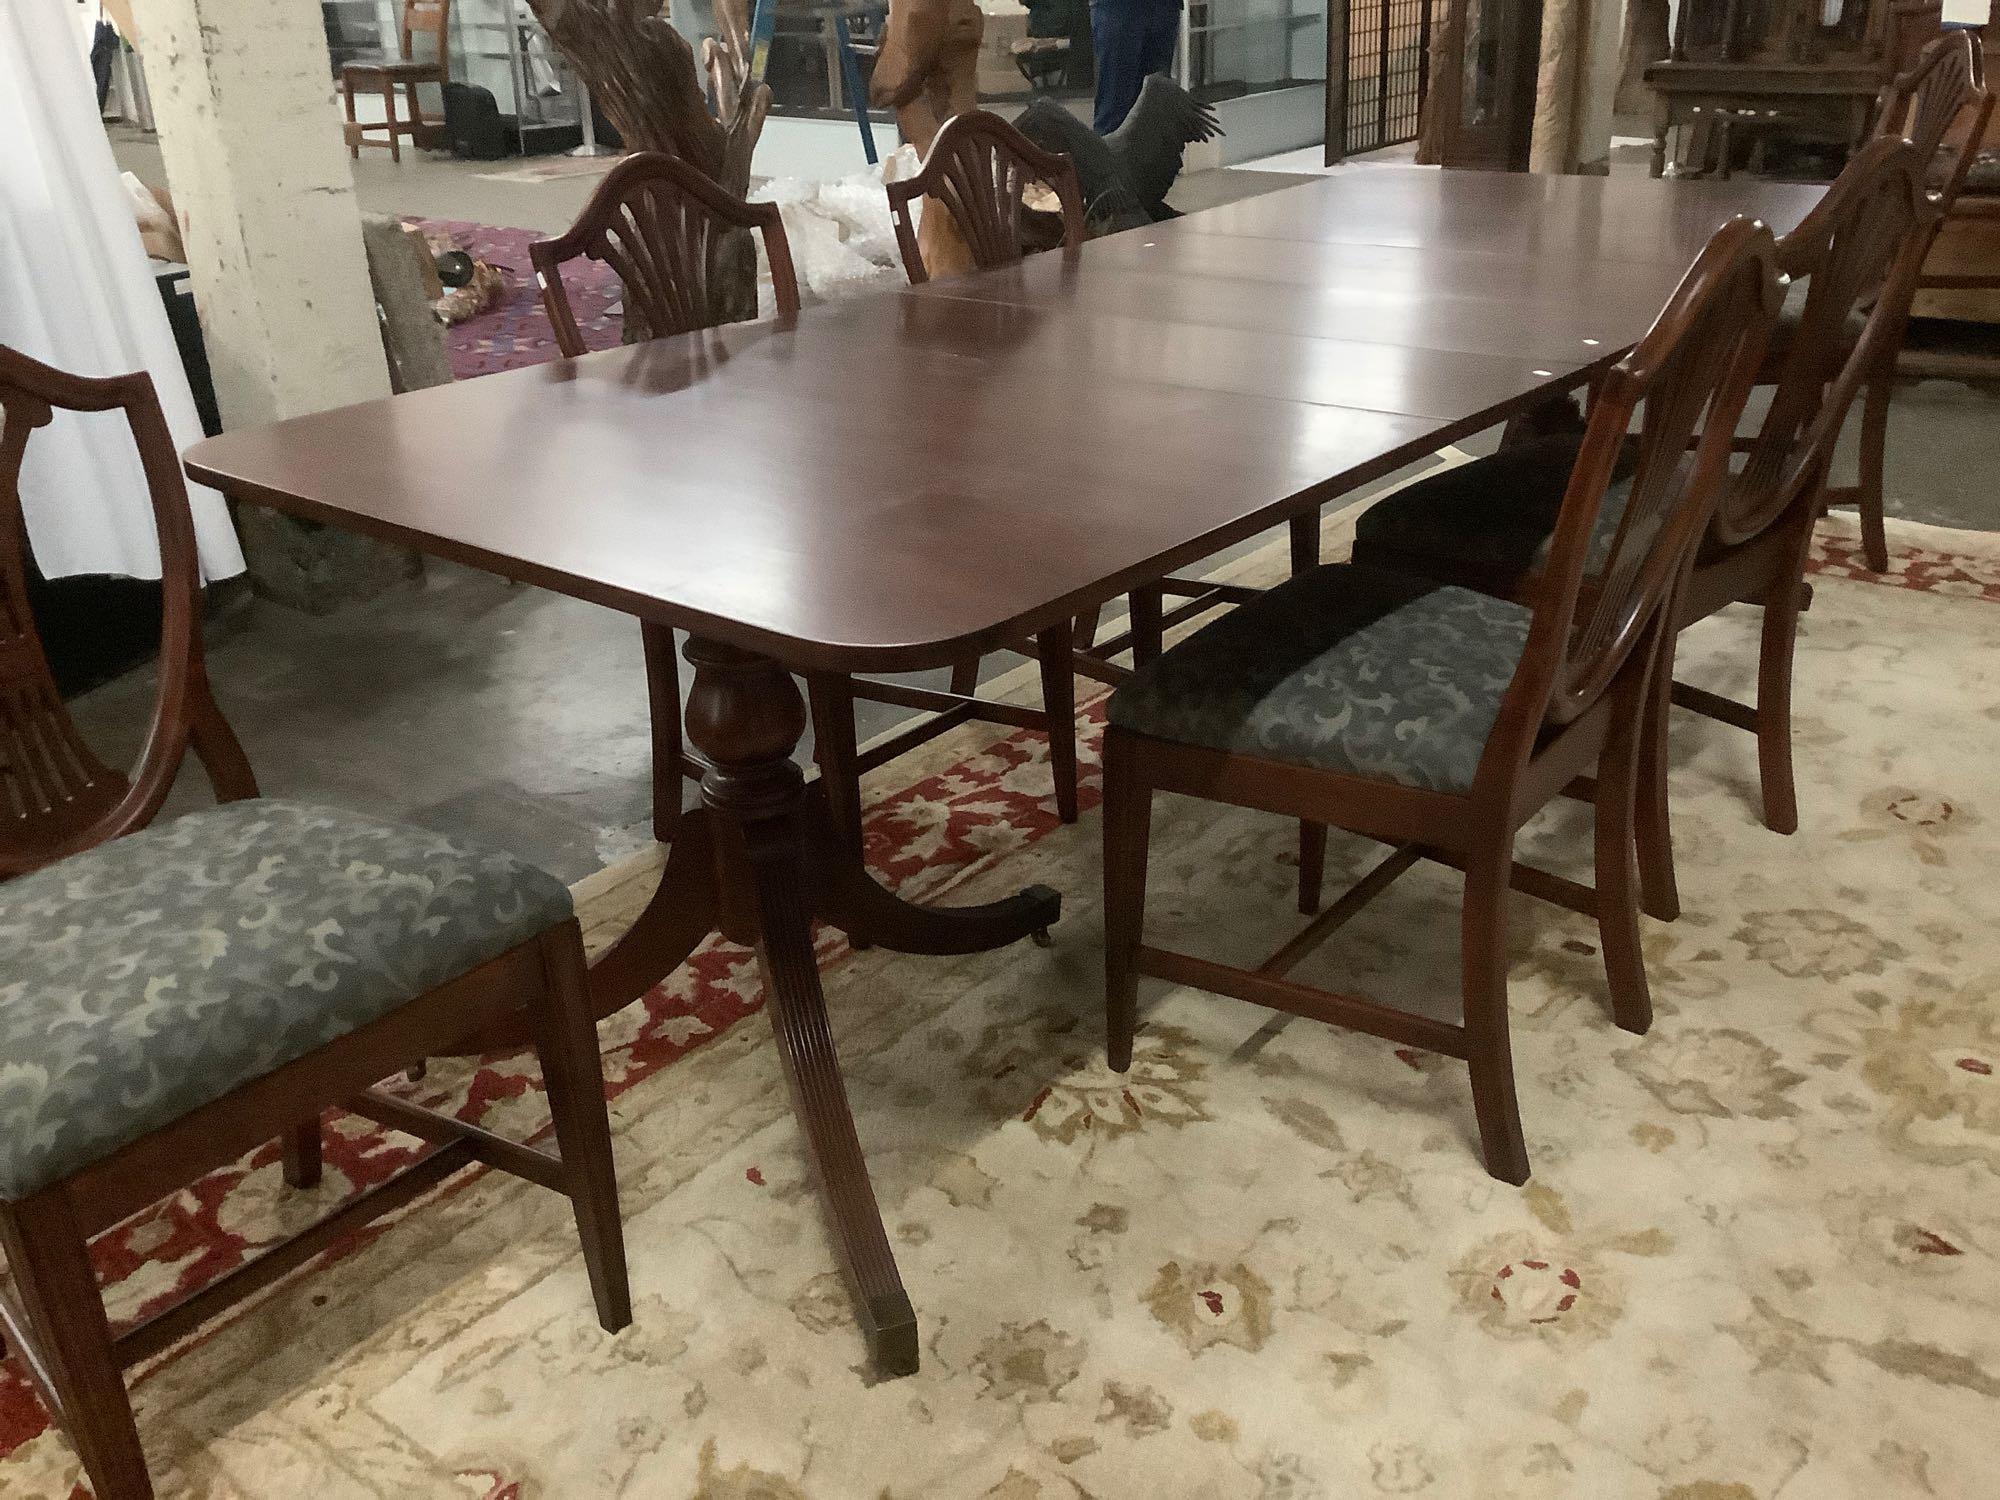 Gorgeous antique Duncan Phyfe style long dining table w/ pedestal bases, 3 leaves & 6 chairs